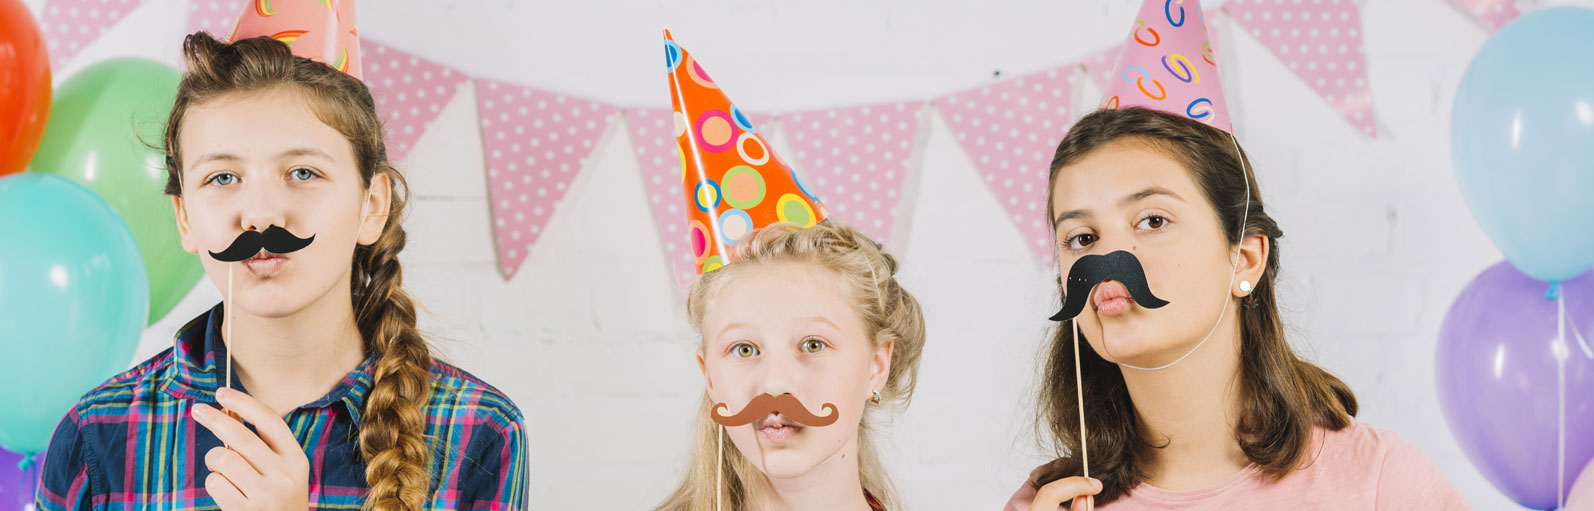 Dressing Up, Pulling Faces and Snapping Pics with Their Friends, You Won’t be Able to Keep Your Kids Away from the Photobooth!